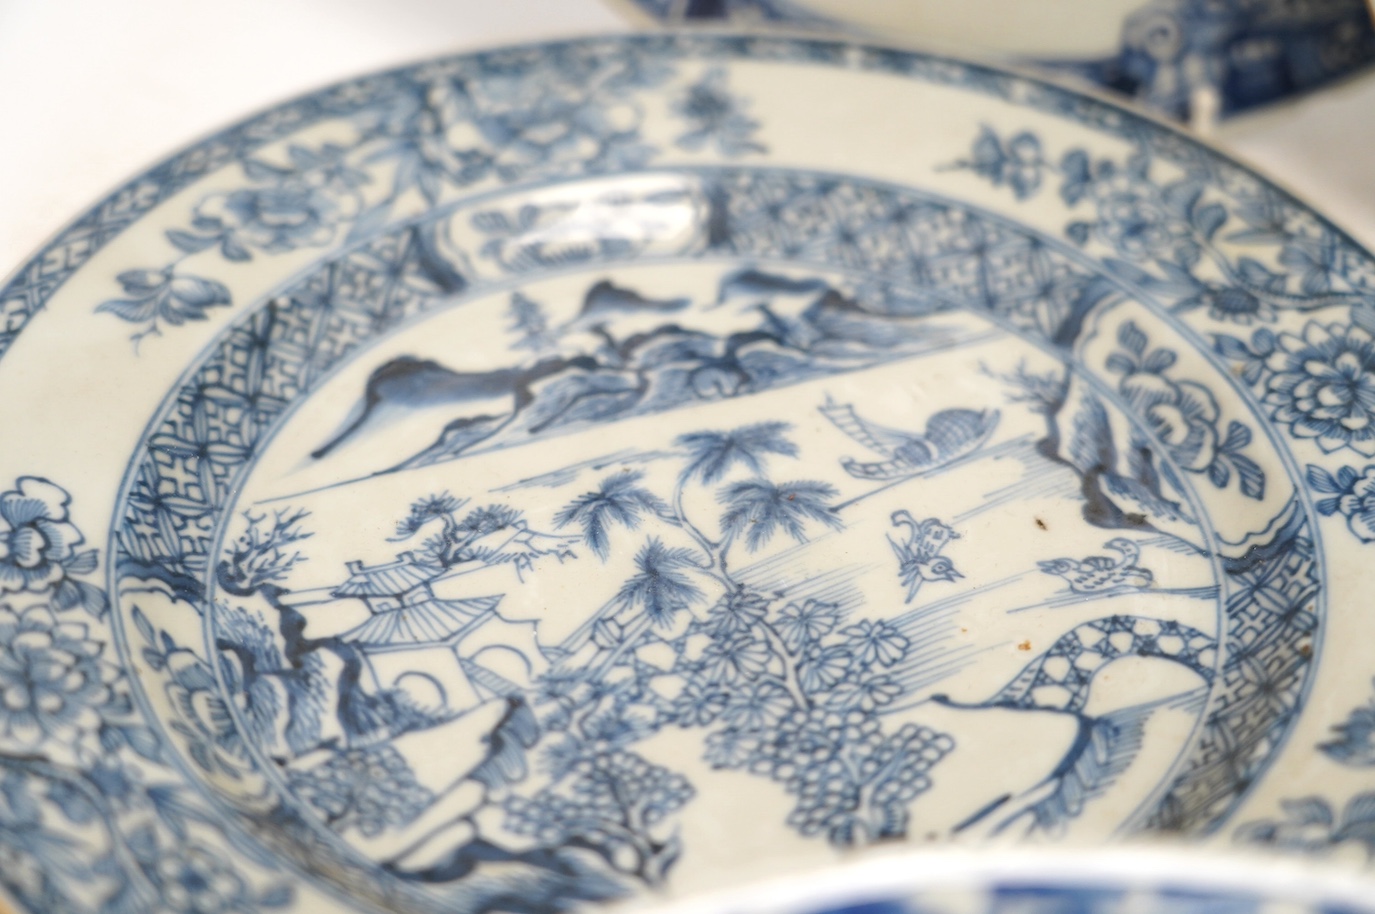 Four Chinese blue and white export plates and a rice bowl, bowl 24.5cm diameter. Condition - poor to fair, some damage to the edges